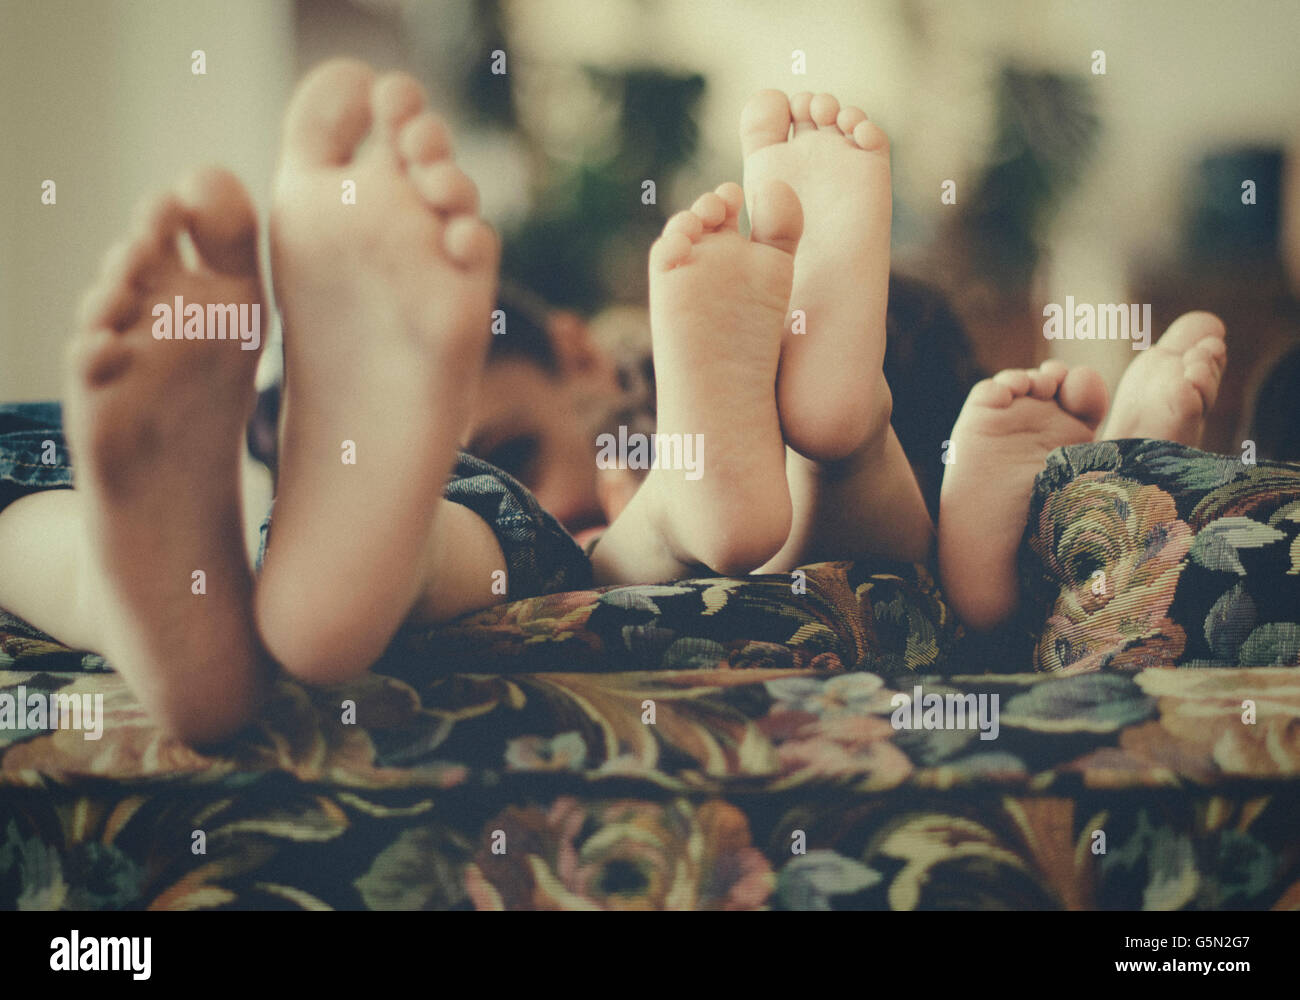 Close up of feet of children on sofa Stock Photo